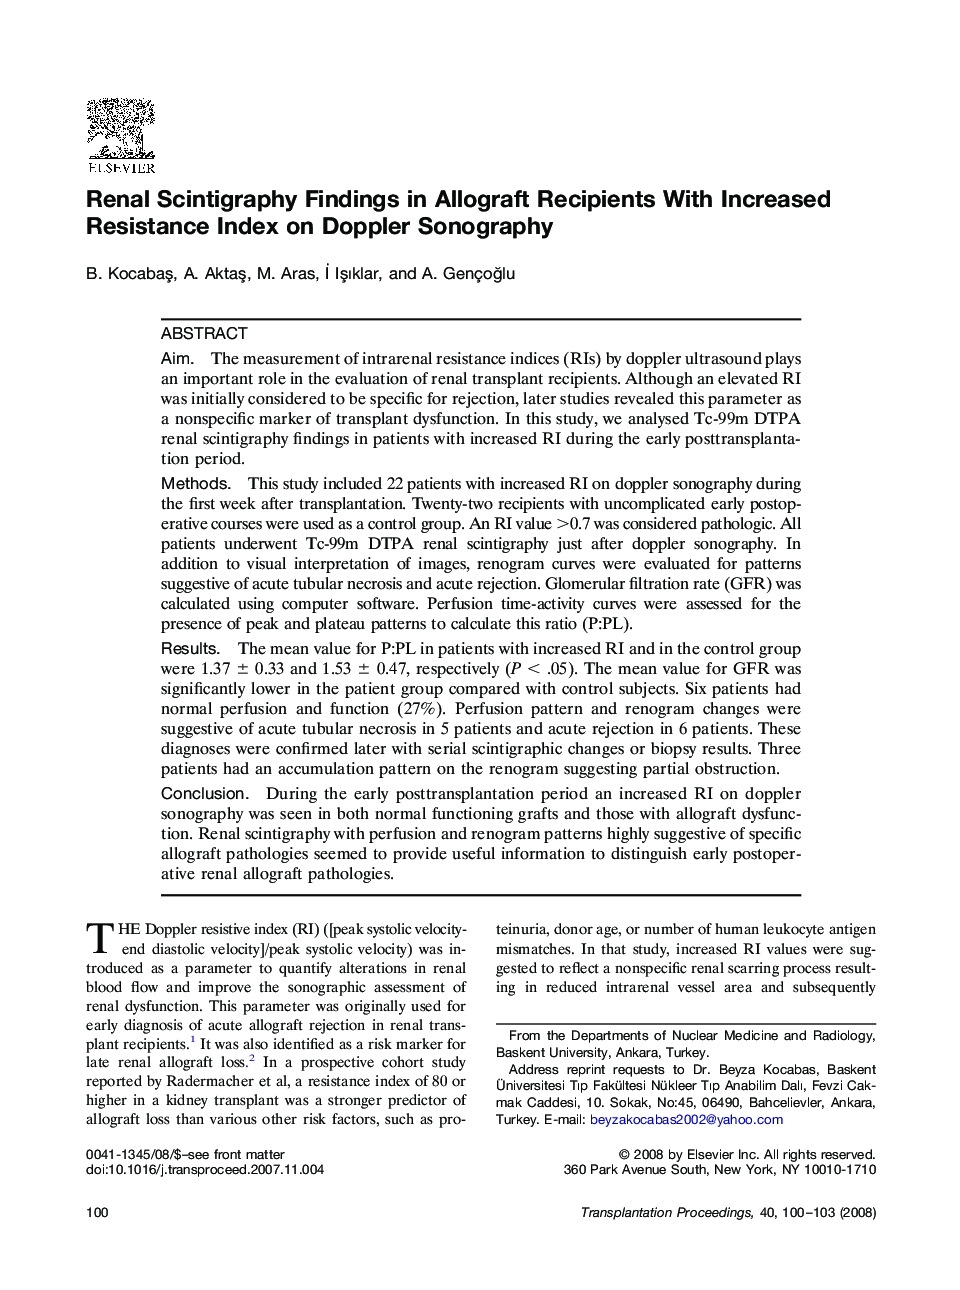 Renal Scintigraphy Findings in Allograft Recipients With Increased Resistance Index on Doppler Sonography